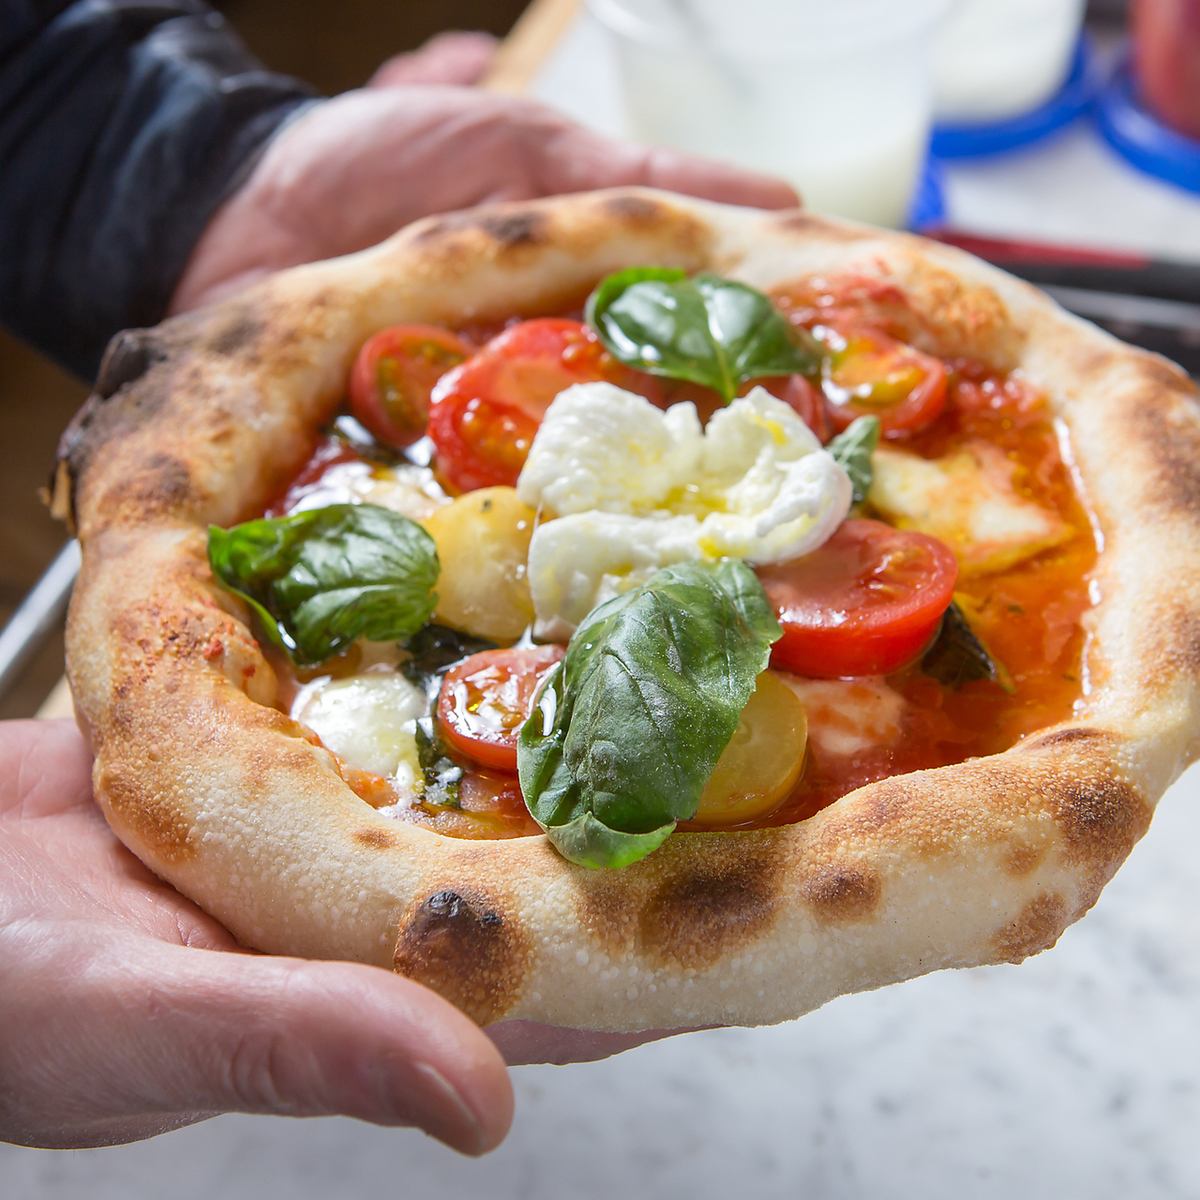 How about a hand-made pizza that the owner is particular about in a green place?